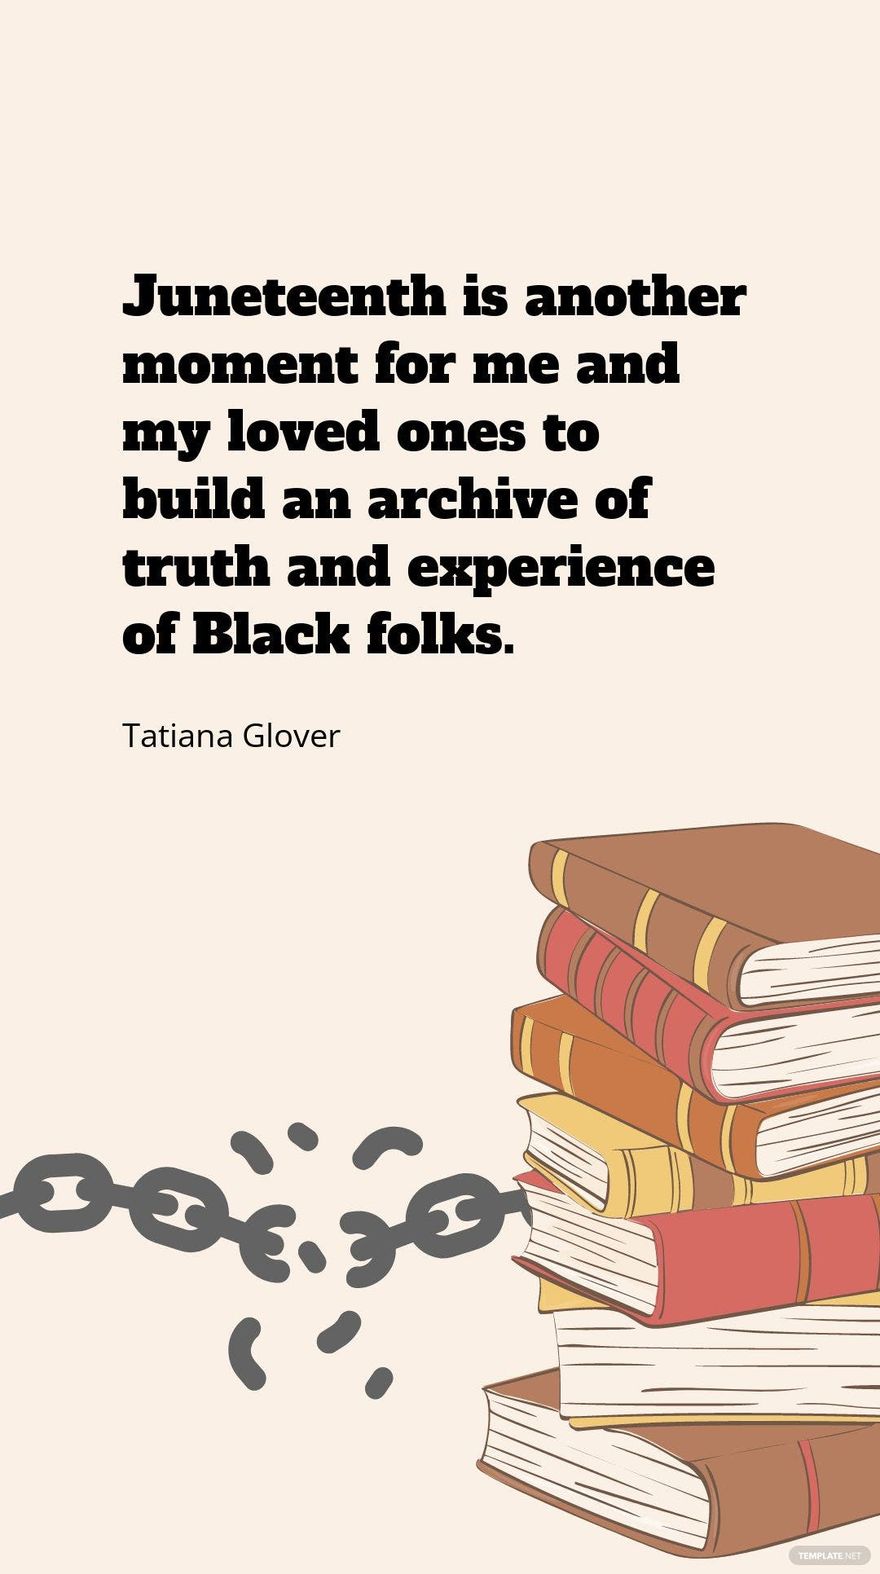 Tatiana Glover - Juneteenth is another moment for me and my loved ones to build an archive of truth and experience of Black folks. in JPG